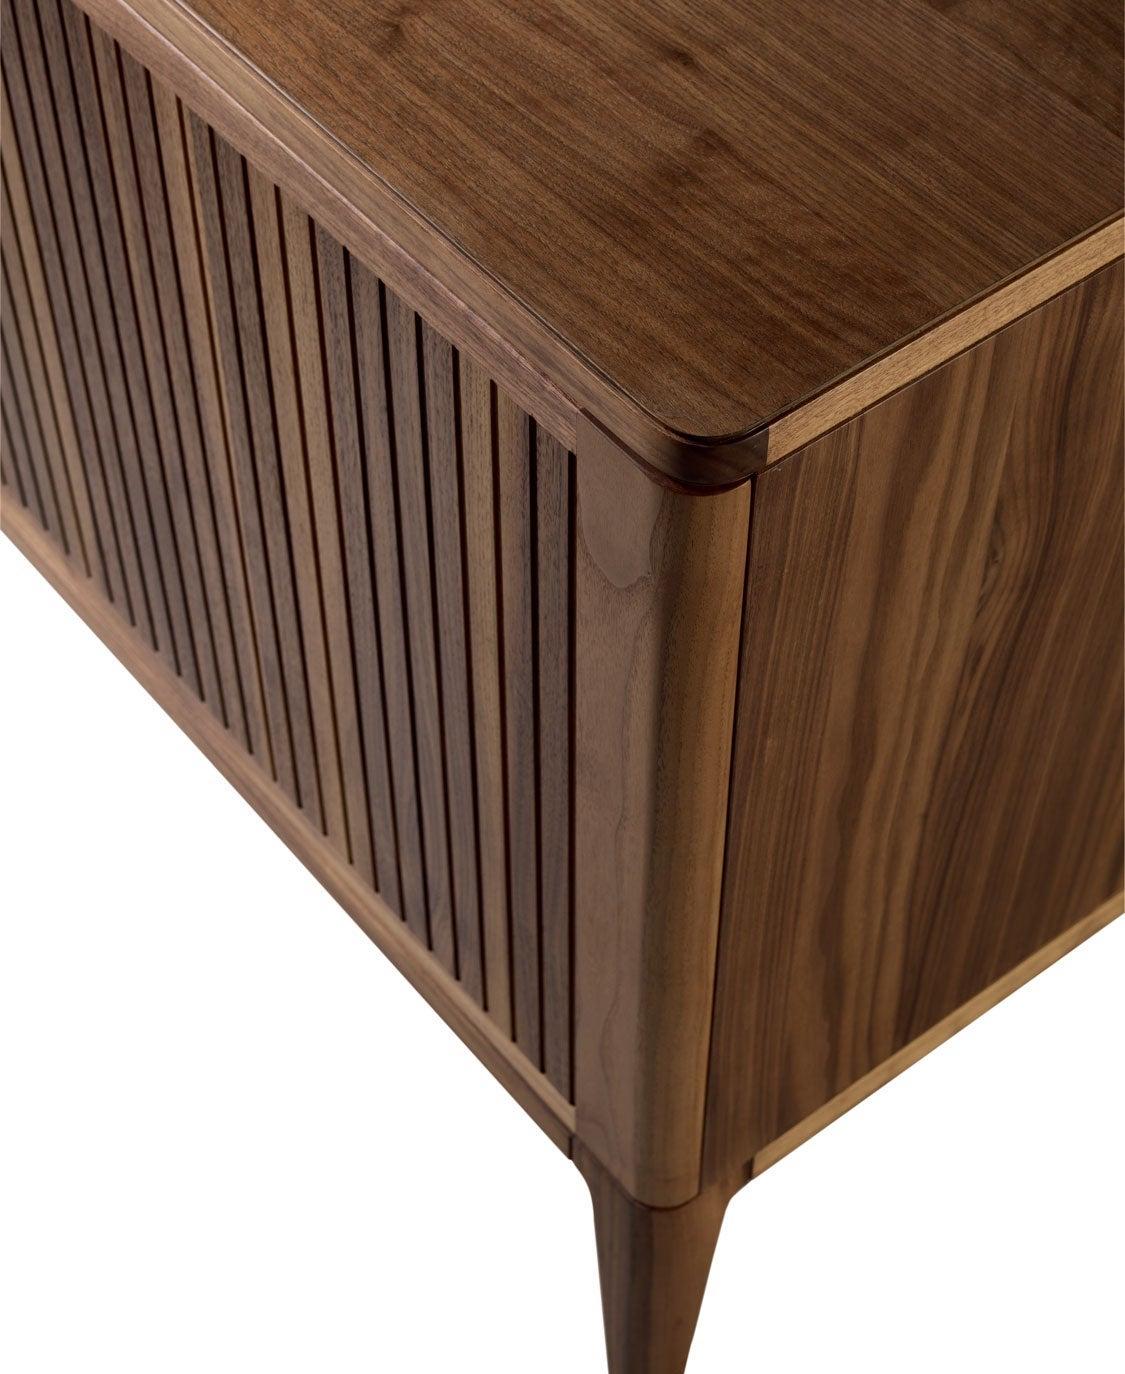 Italian Eleva Solid Wood Sideboard, Walnut in Hand-Made Natural Finish, Contemporary For Sale